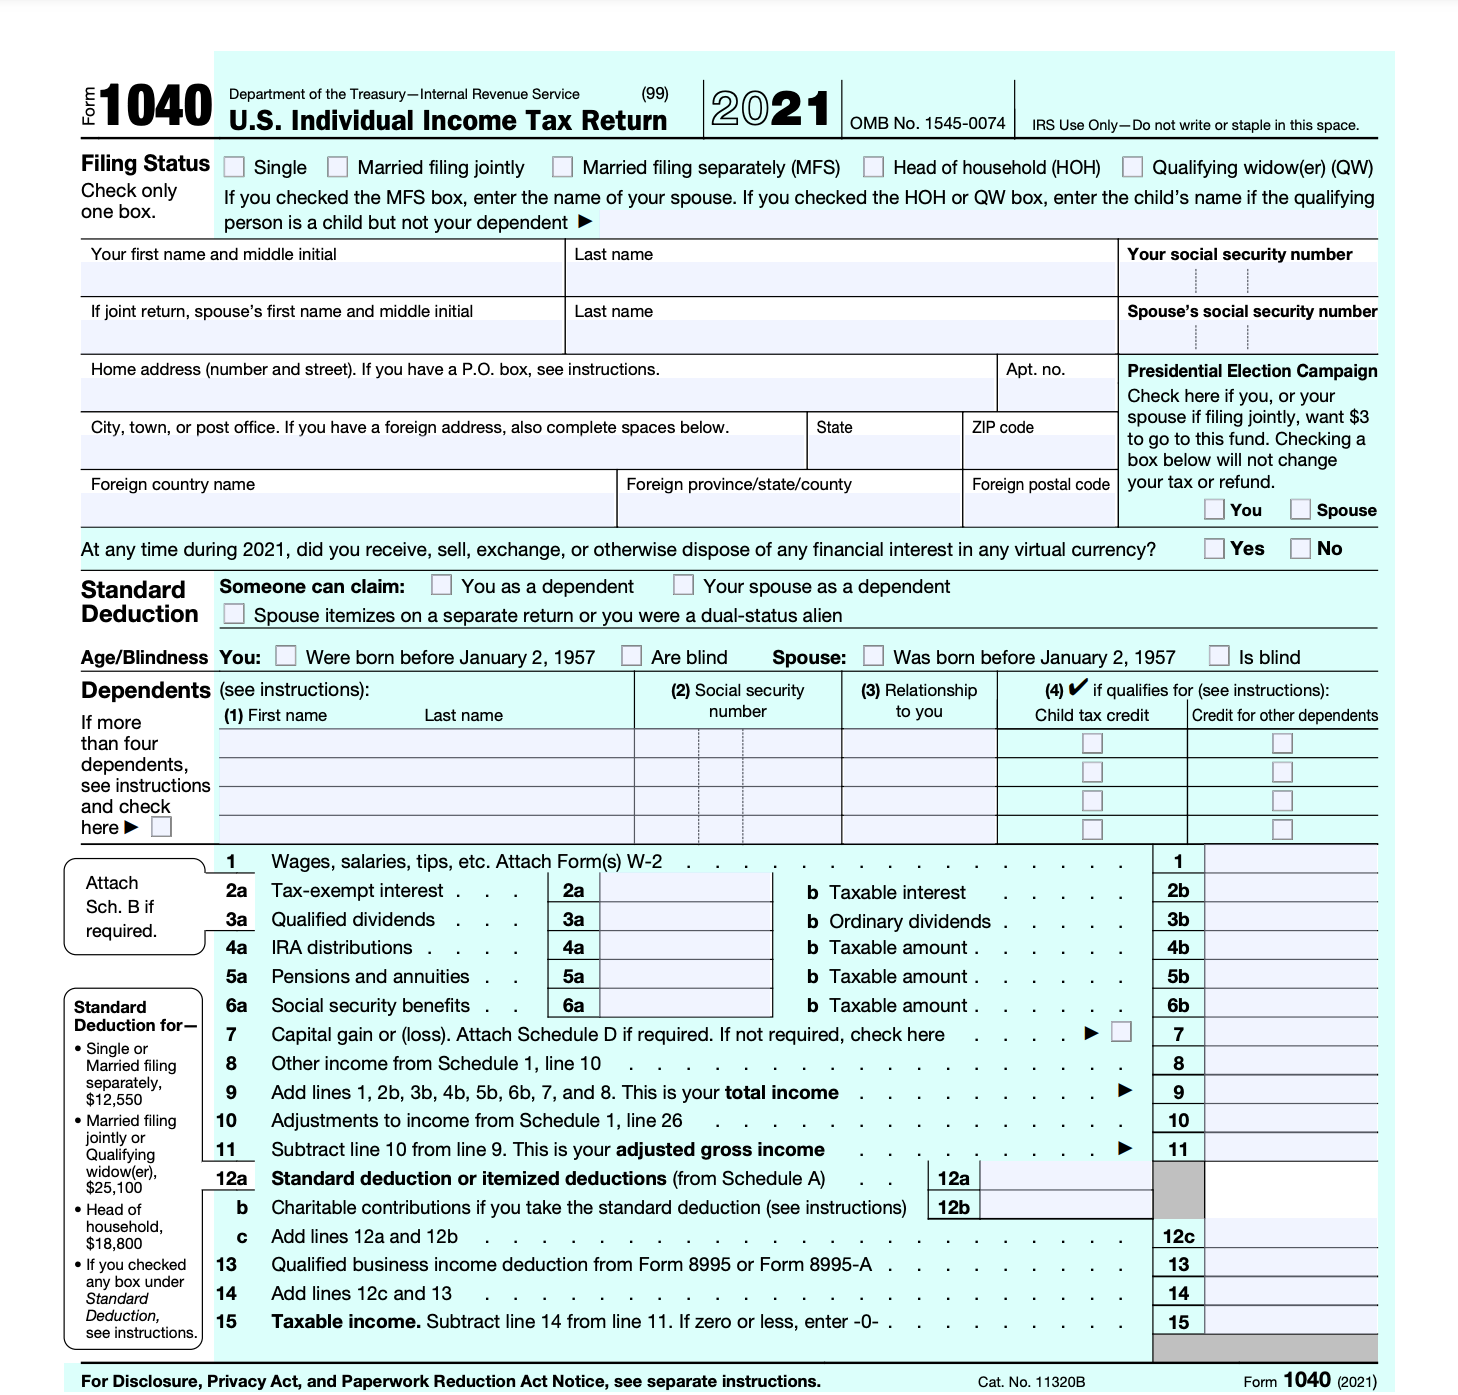 Irs Schedule 2 Instructions 2022 What Is Irs Form 1040? (Overview And Instructions) | Bench Accounting